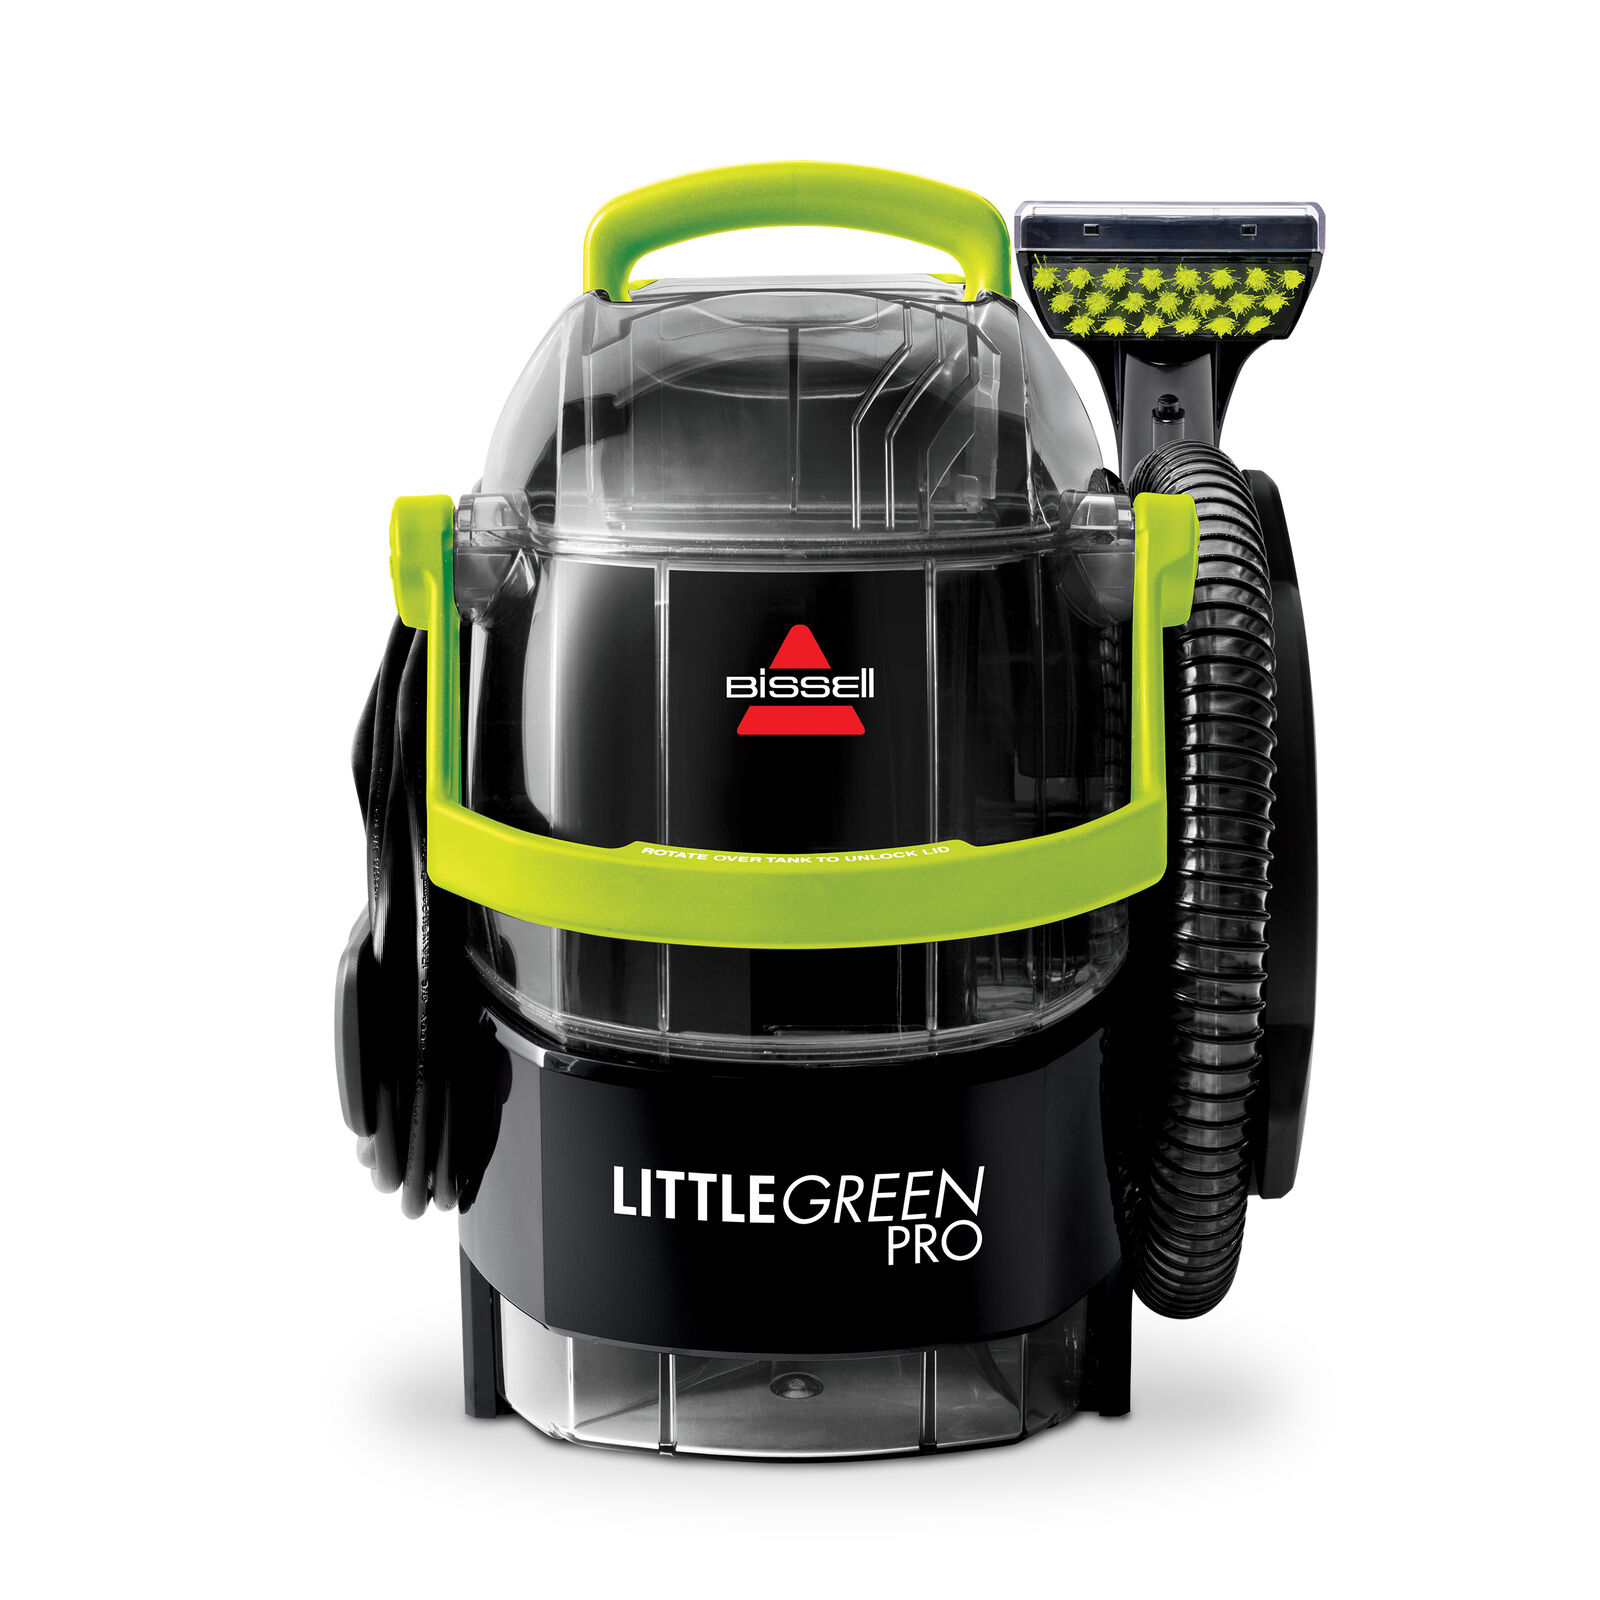 Bissell 2505 Little Green Pro Portable Carpet Cleaner